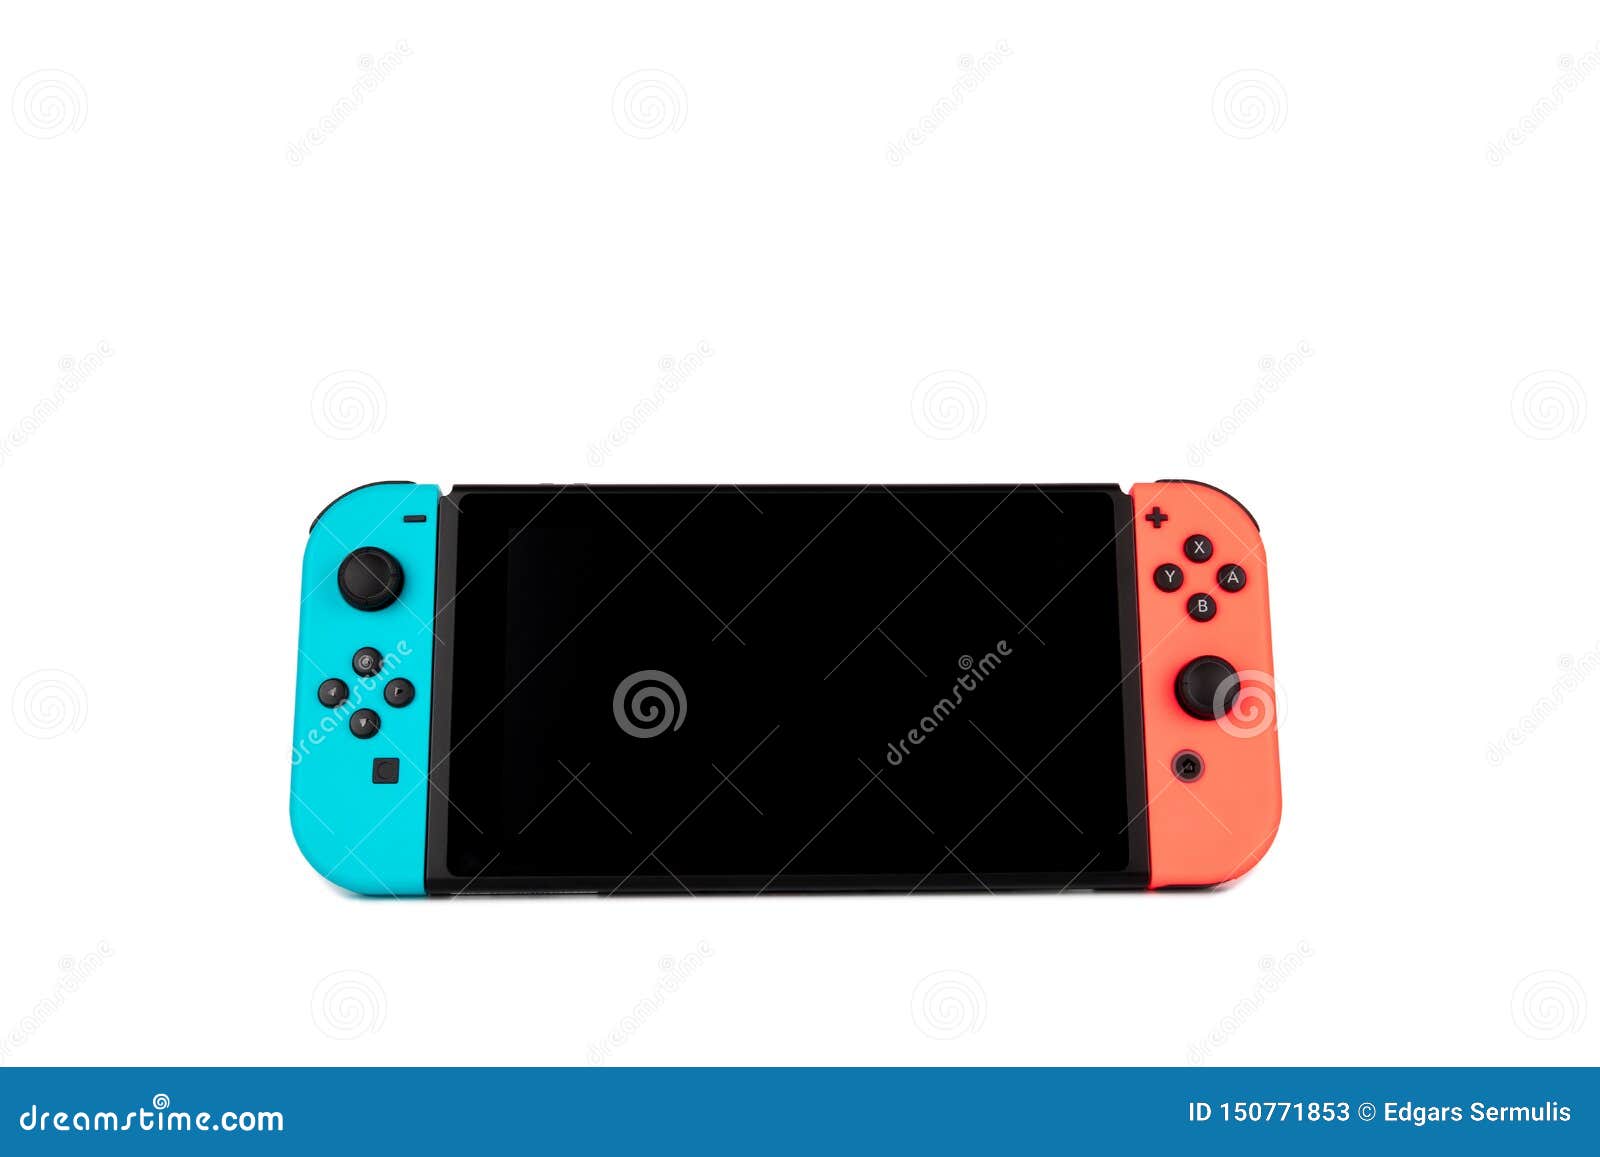 Nintendo Switch video game console developed by Nintendo, released on March  3, 2017 on a white background. Germany, Berlin - June 30, 2019: Nintendo  Switch Joy-con controller on a white background Stock Photo